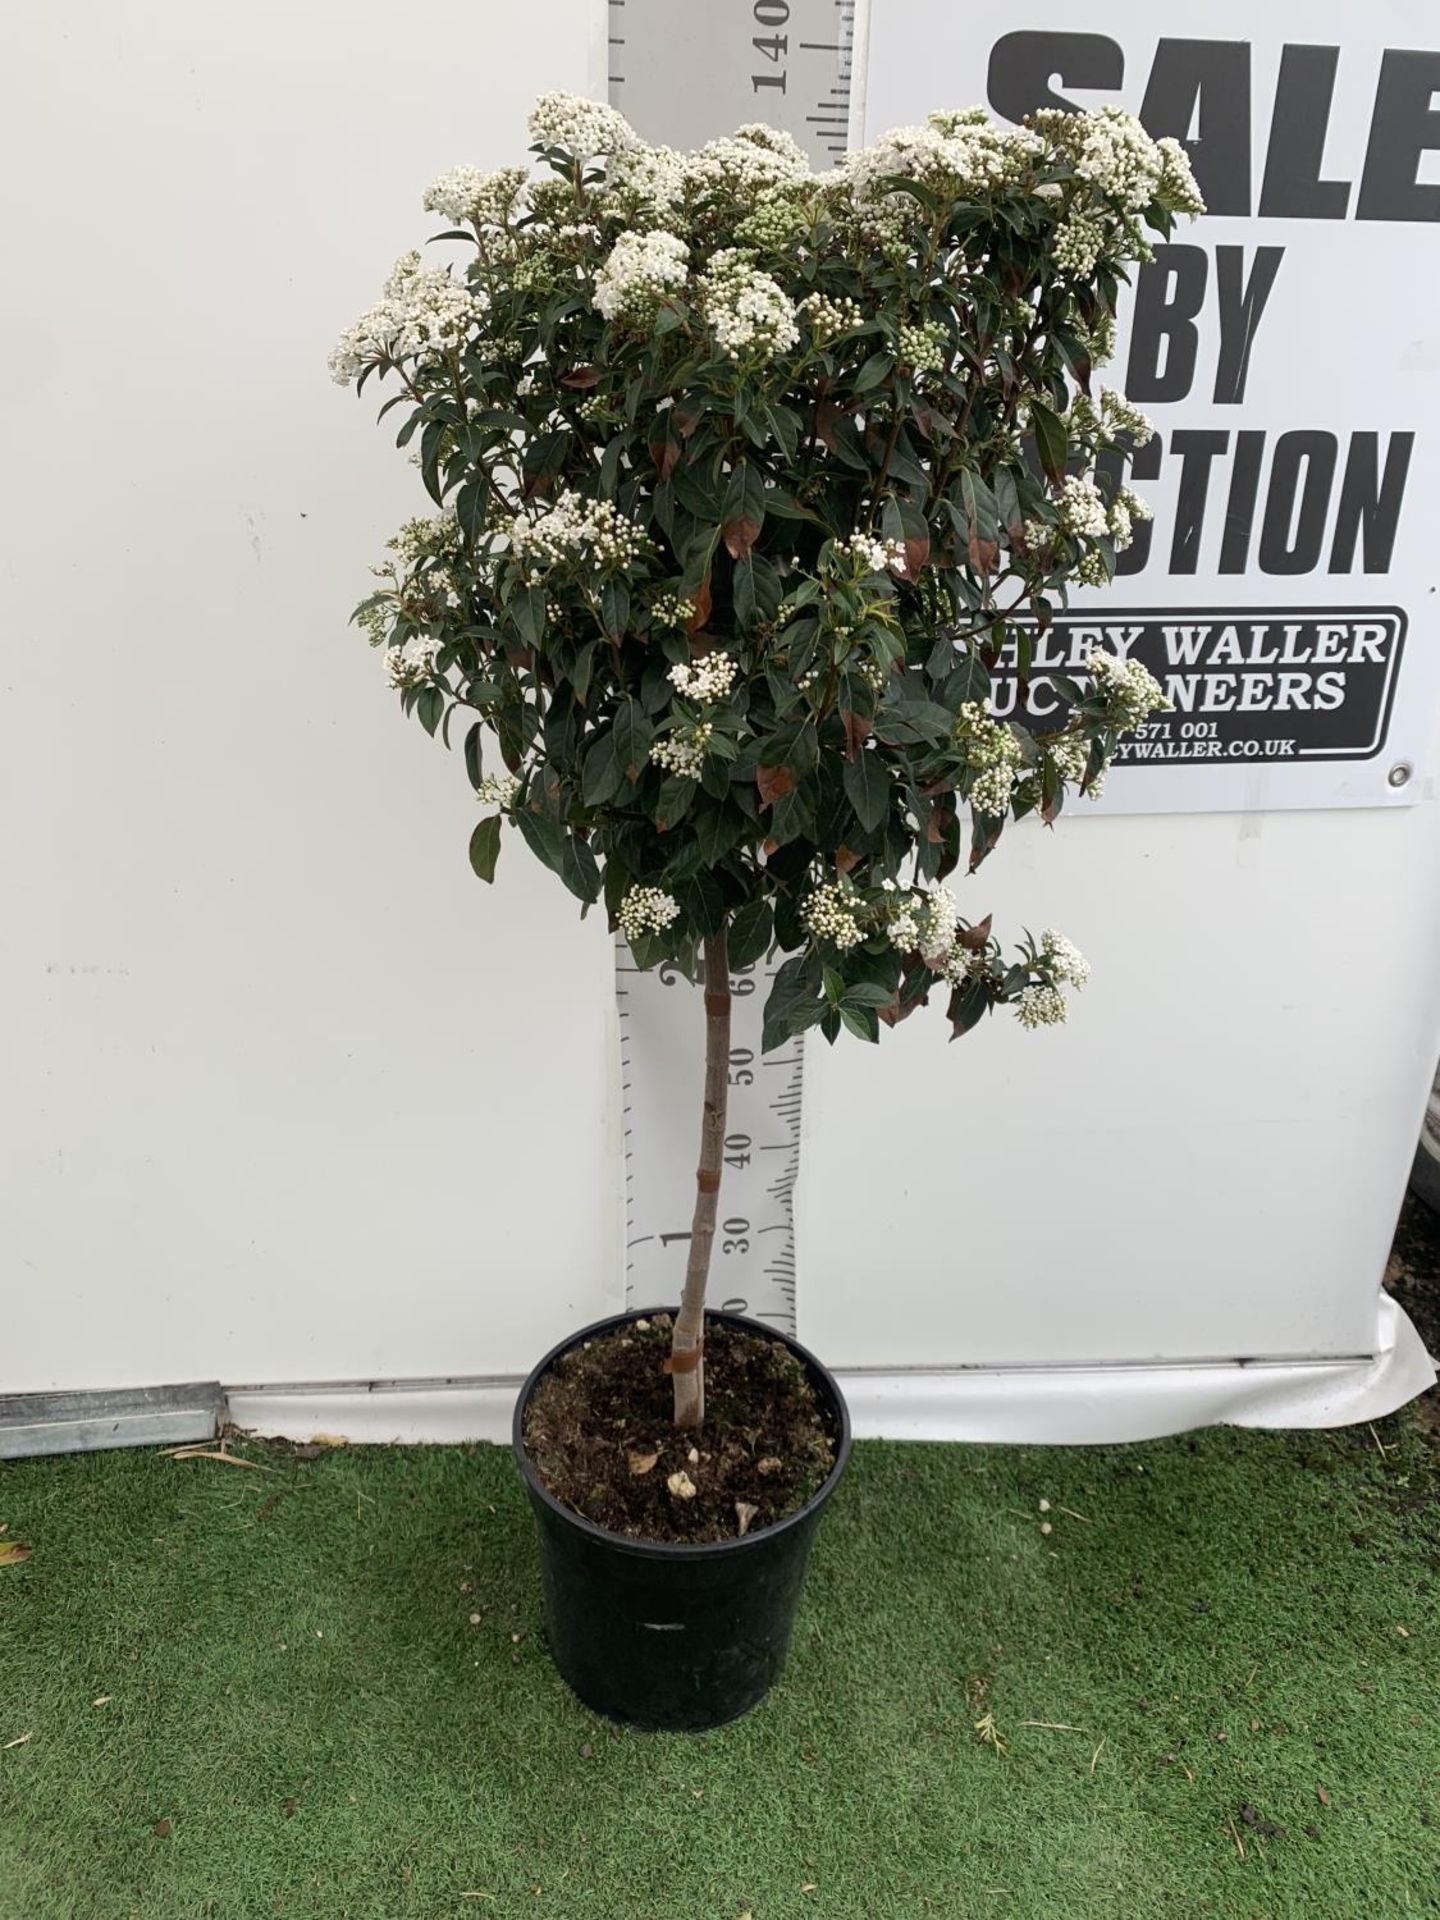 ONE VIBURNUM TINUS STANDARD TREE 'EVE PRICE' APPROX 130CM IN HEIGHT IN A 10 LTR POT PLUS VAT